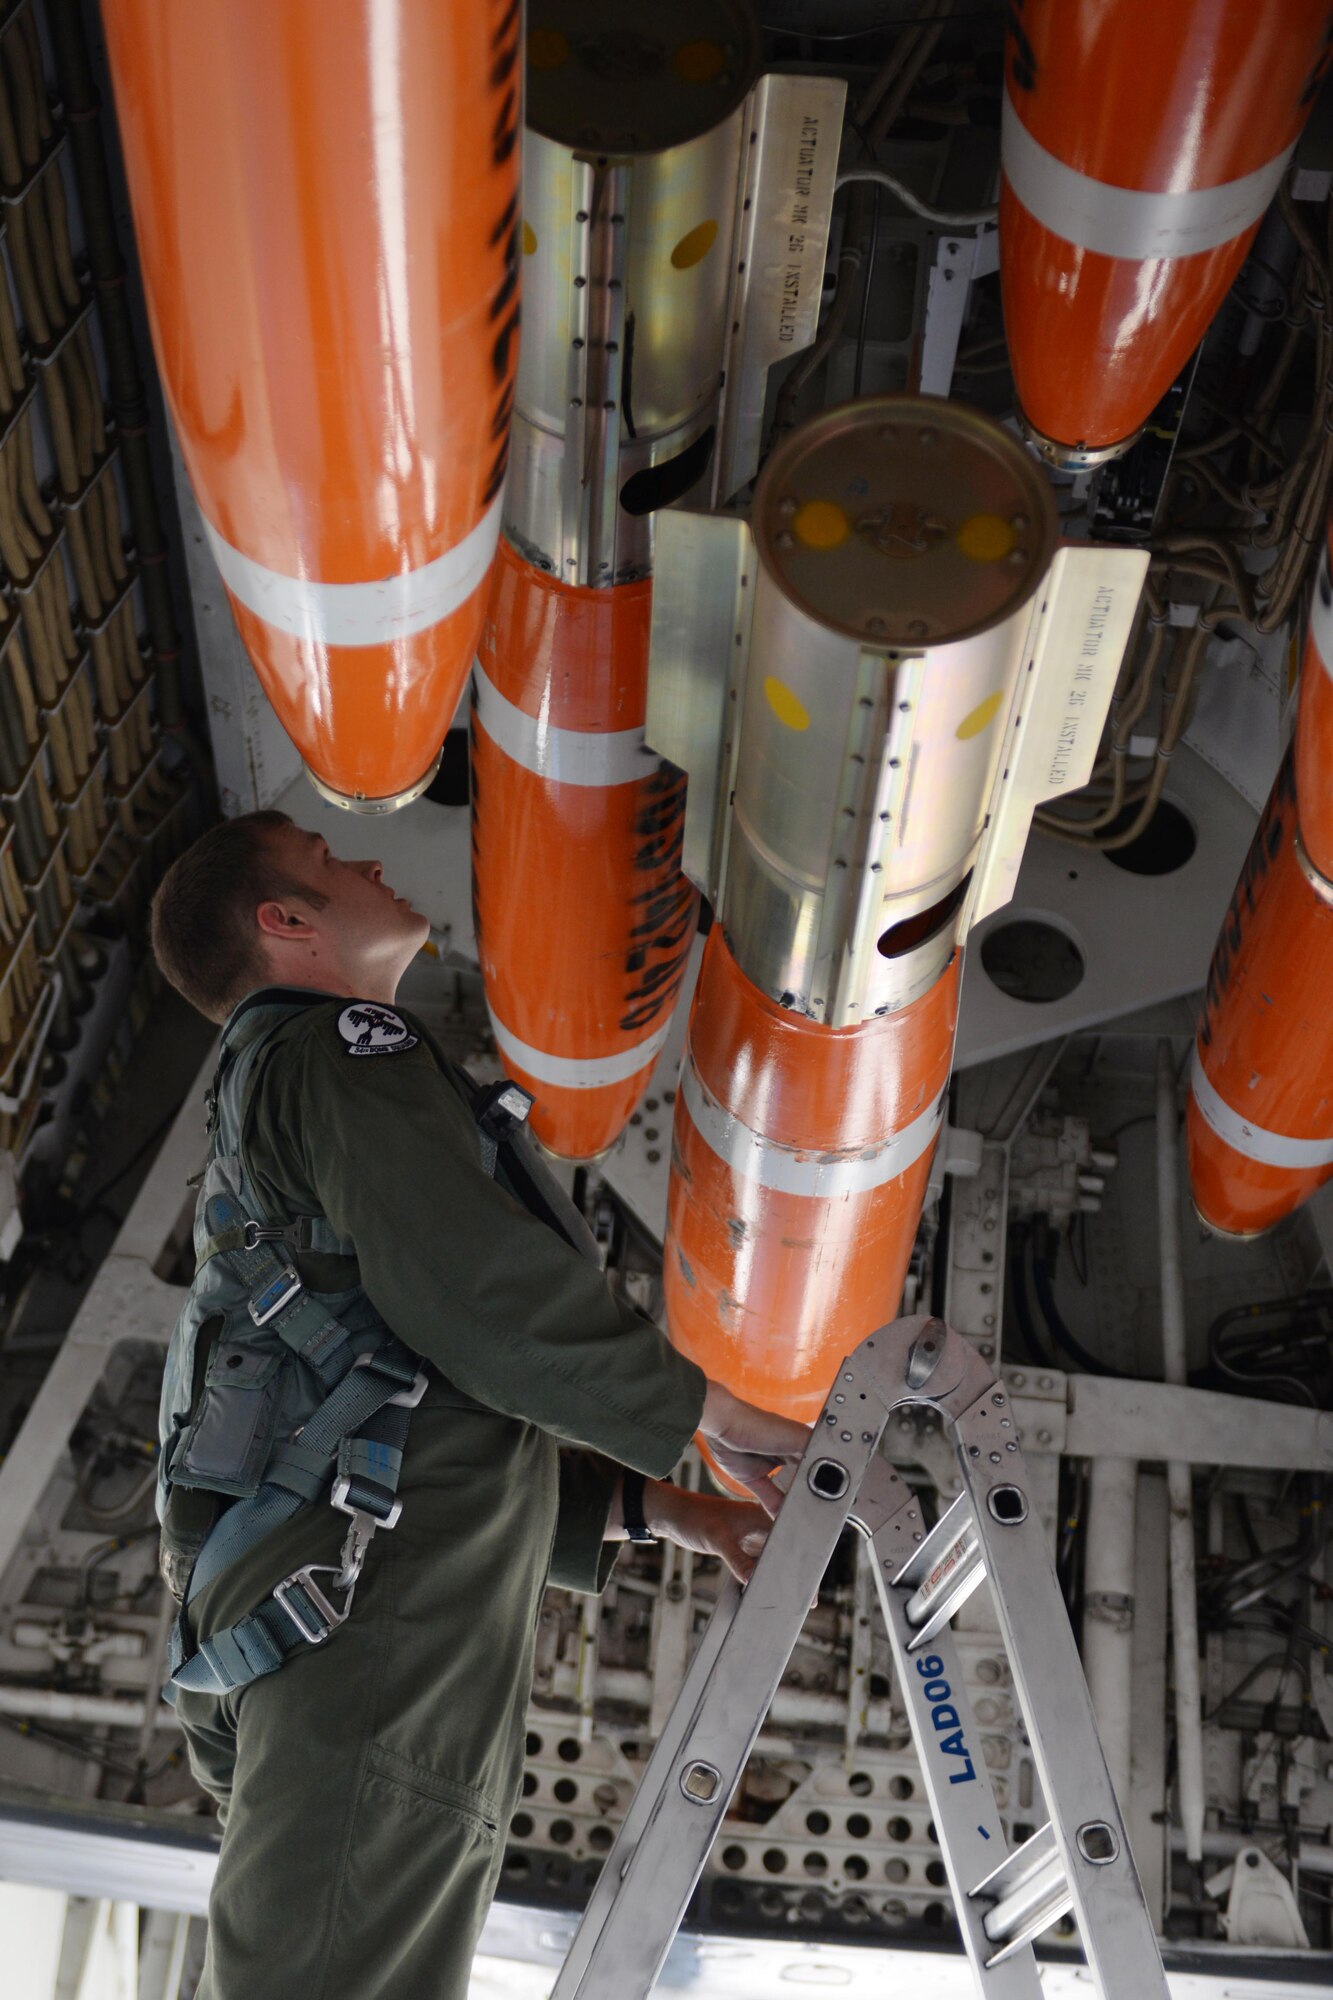 First Lt. Aaron Tindall, 34th Bomb Squadron B-1 weapons system officer, inspects munitions in the bomb bay of a B-1 bomber at Ellsworth Air Force Base, S.D., June 3, 2014. Base Airmen assisted Sailors in building, loading and deploying Mk-62 and Mk-65 Quick Strike mine munitions, strengthening joint operation mission capabilities and effectiveness. (U.S. Air Force photo by Airman 1st Class Rebecca Imwalle/Released)